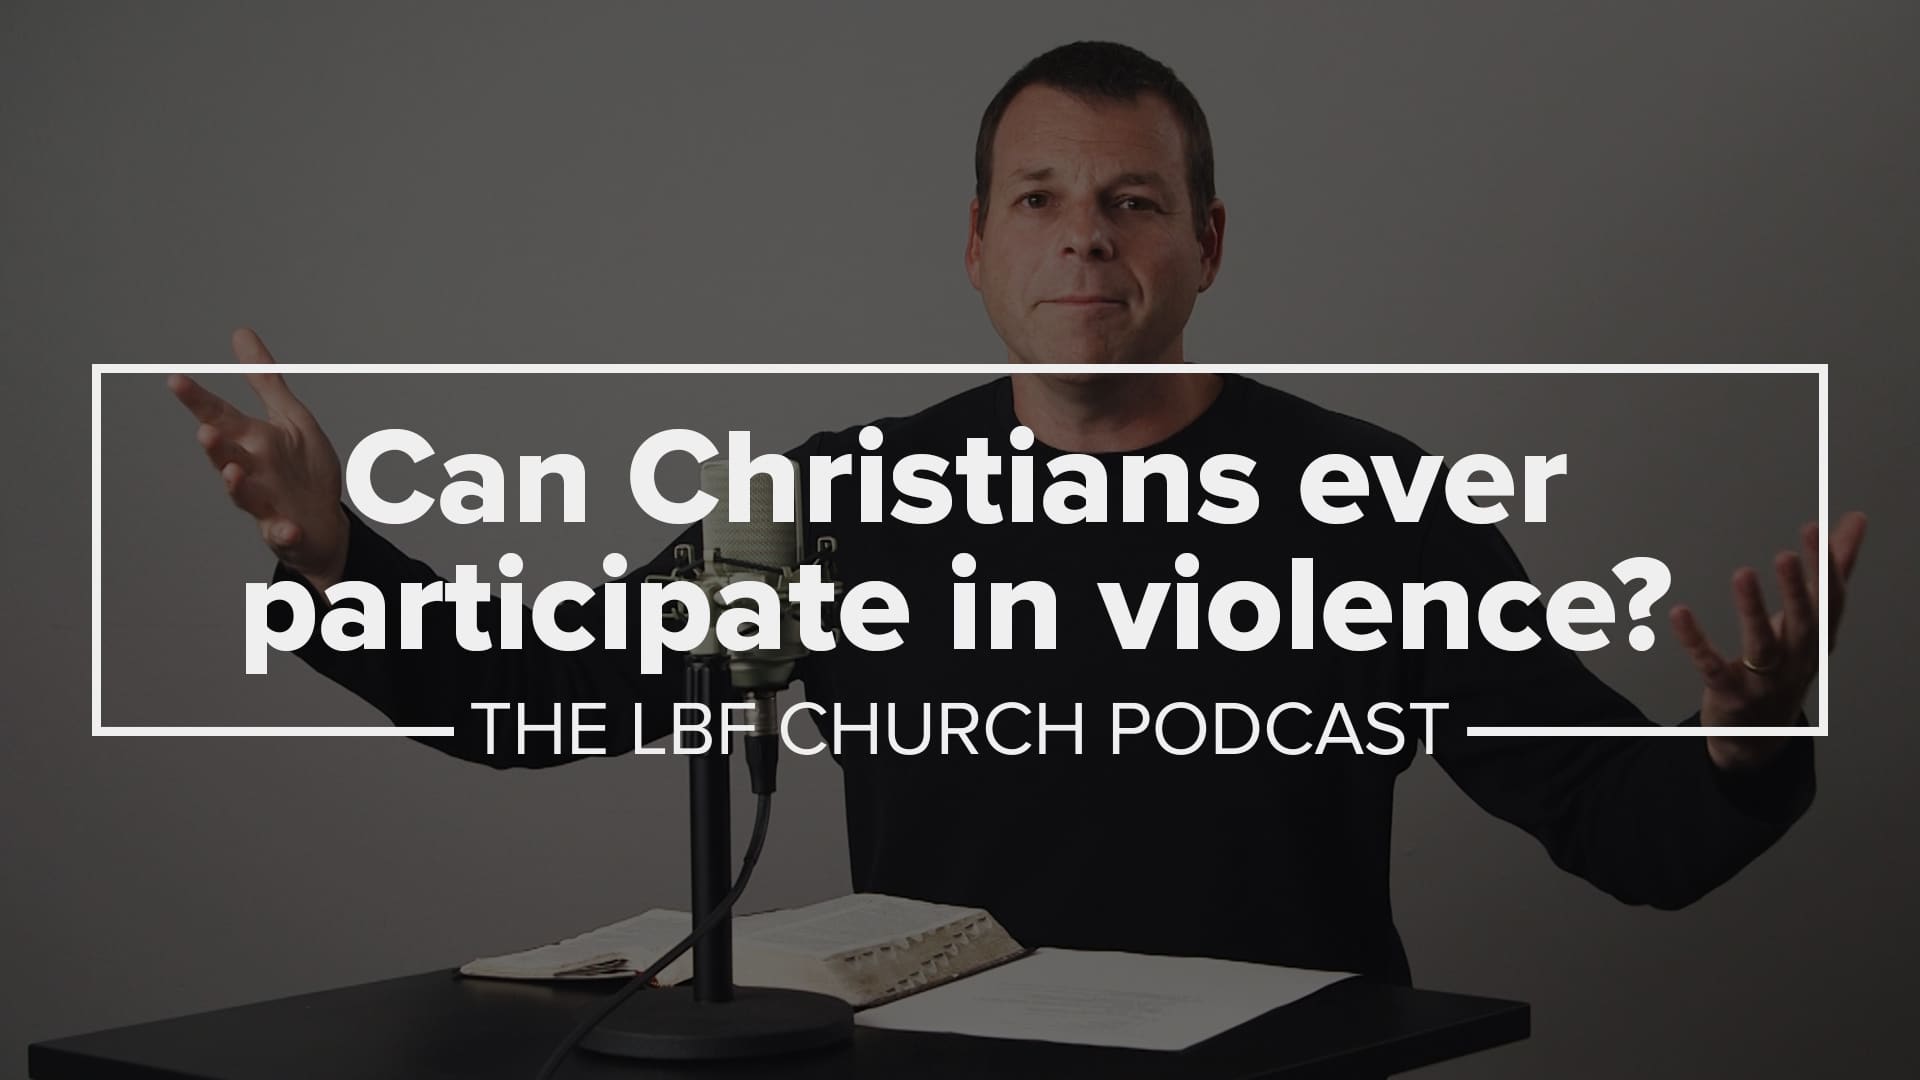 Violence and Christians